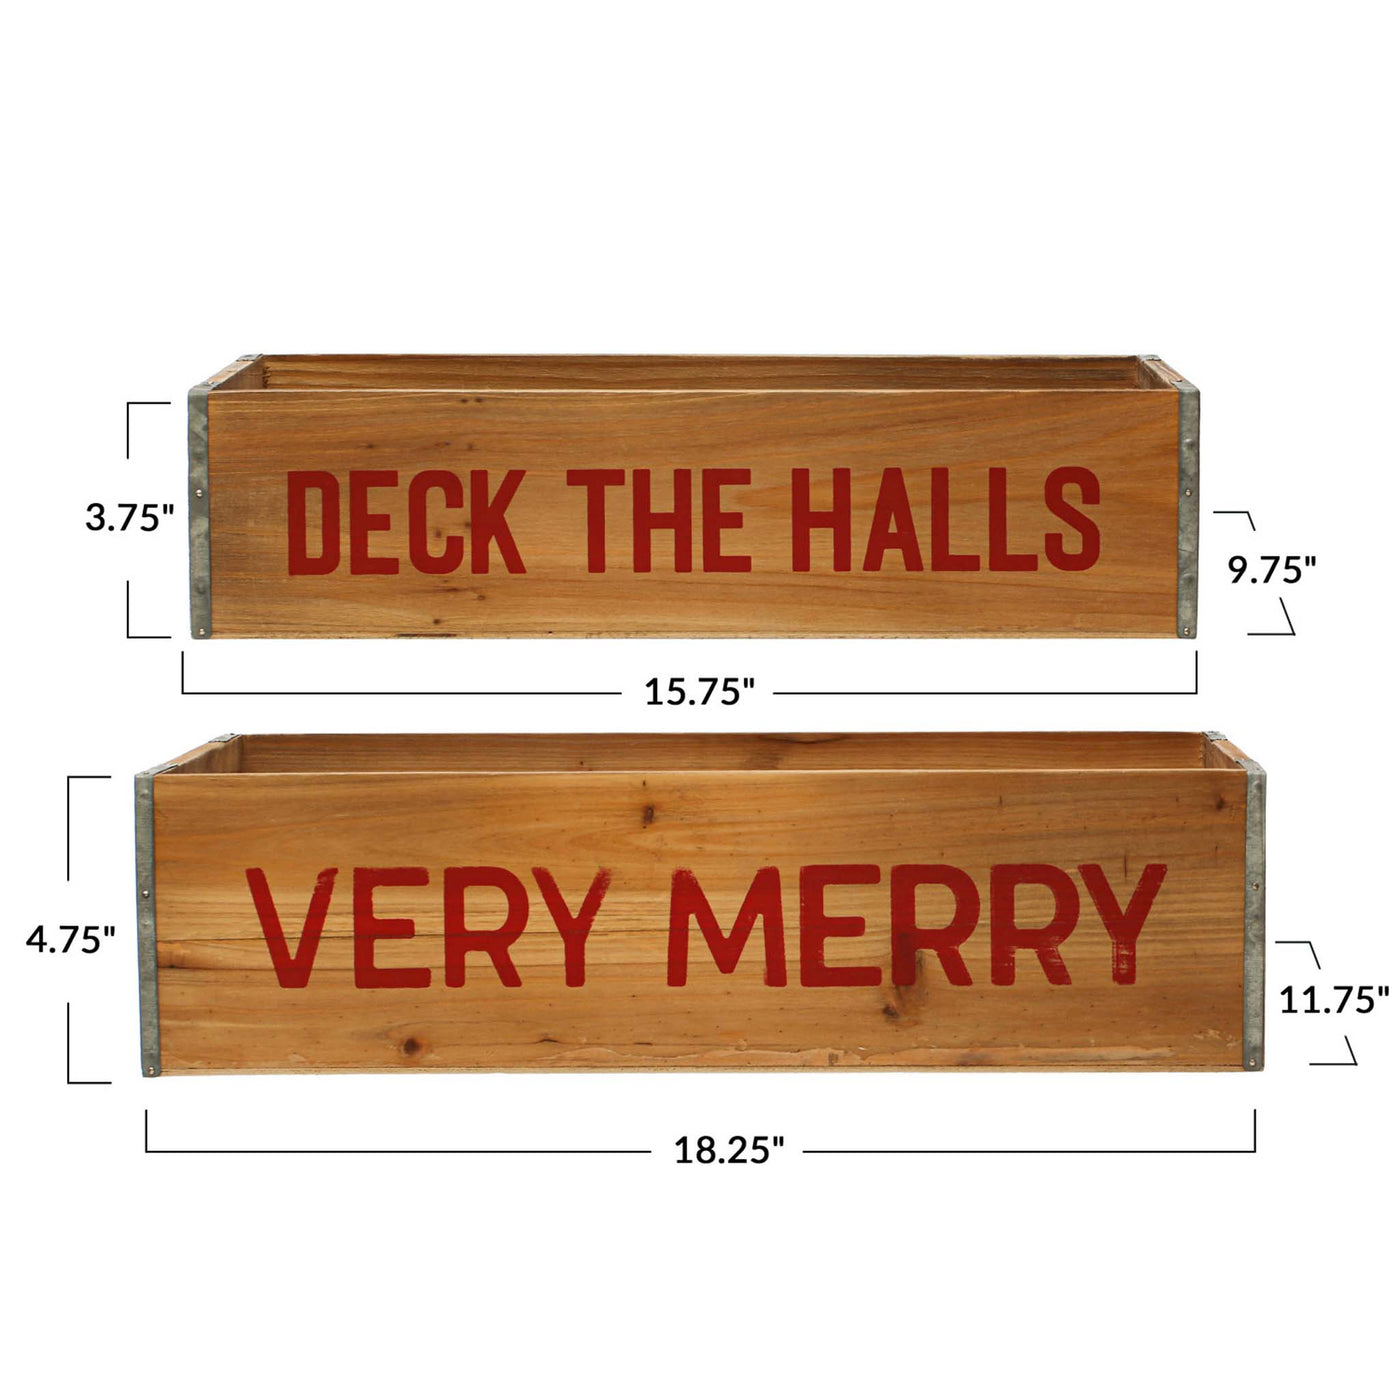 Deck The Halls & Very Merry Wood Boxes